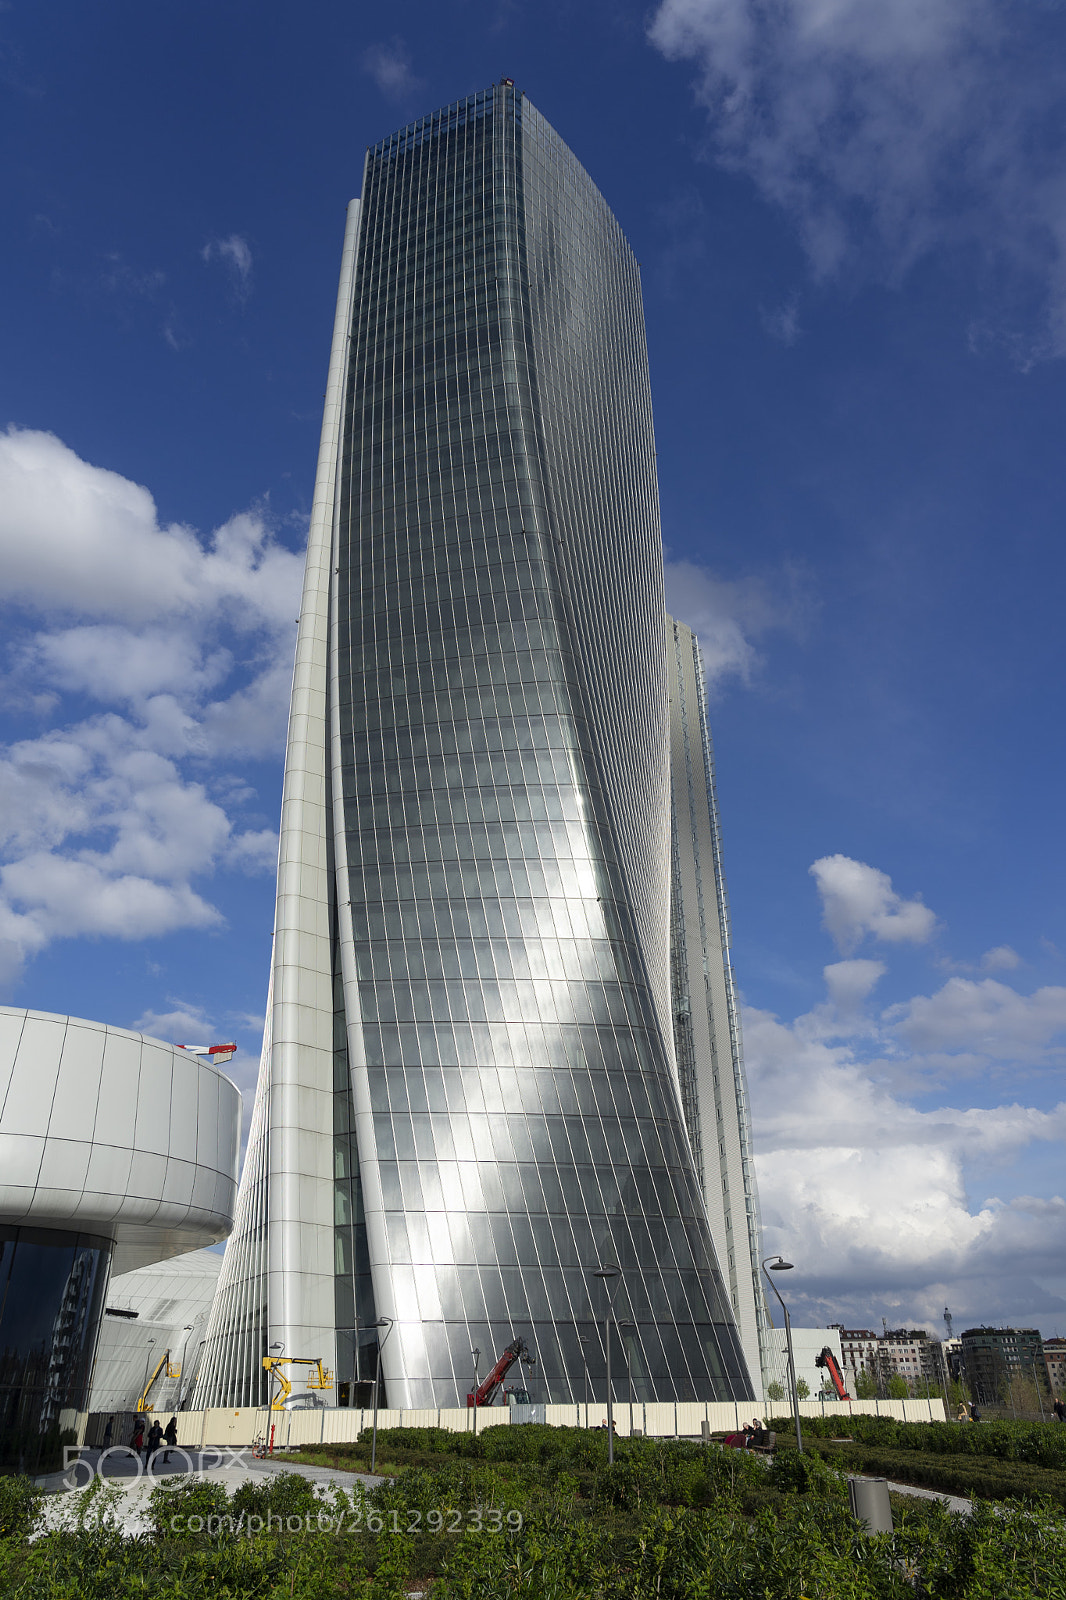 Sony a7 II sample photo. Hadid tower at citylife photography